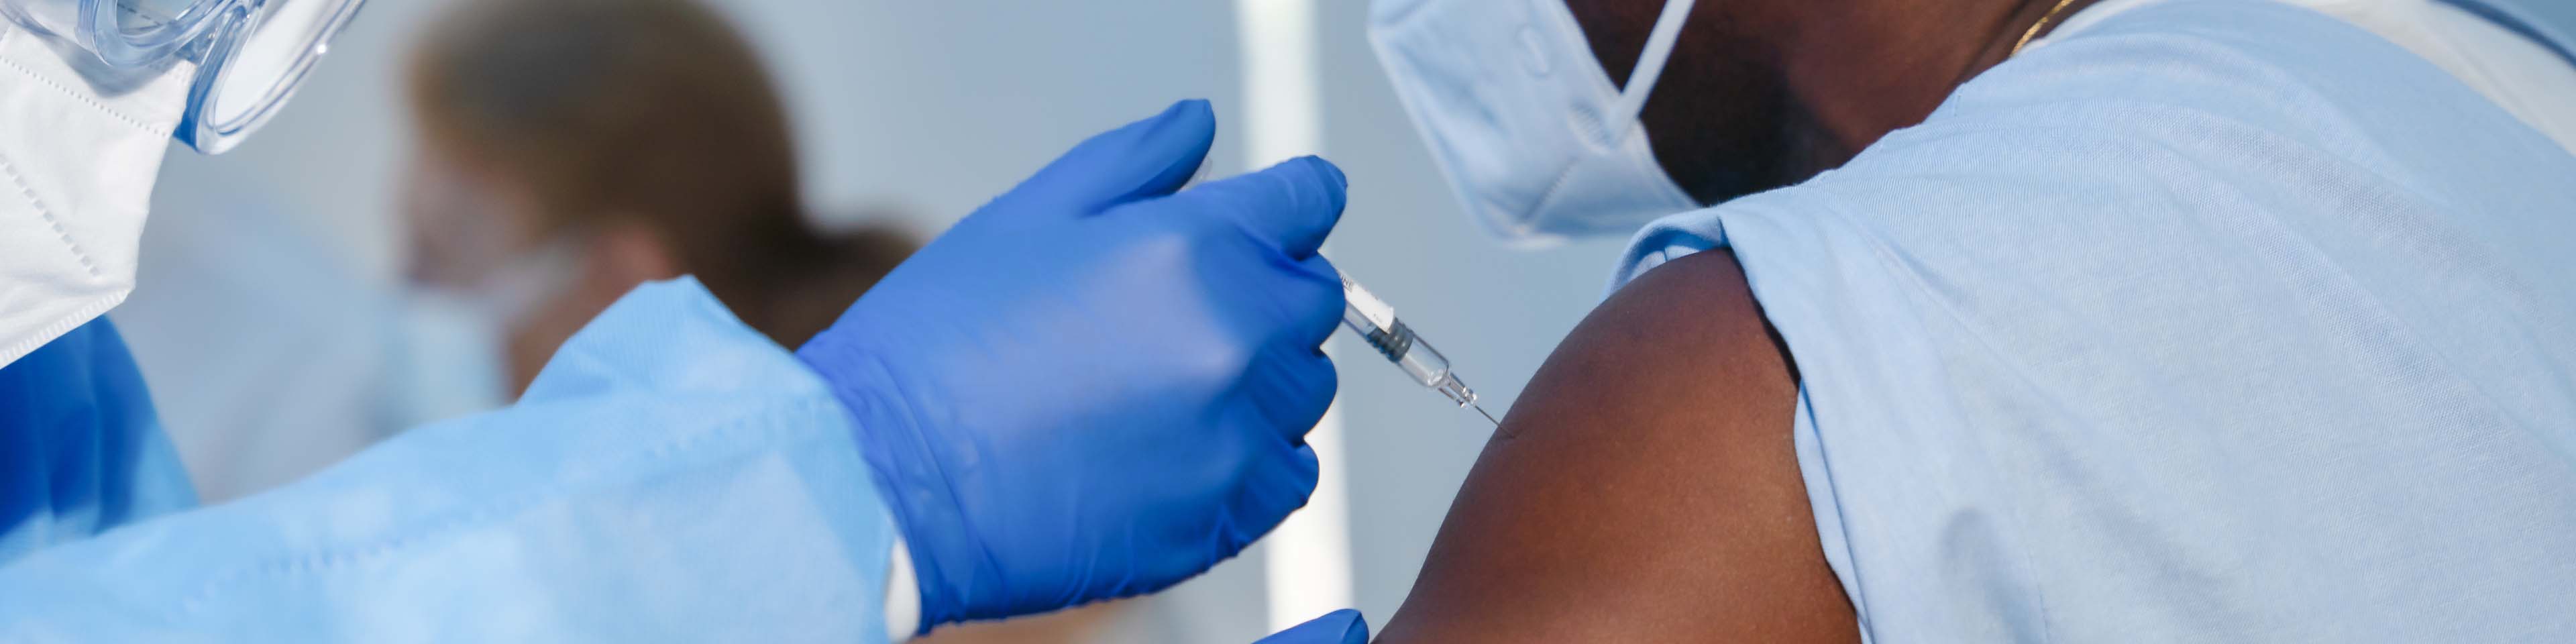 African-American male receiving Covid vaccine